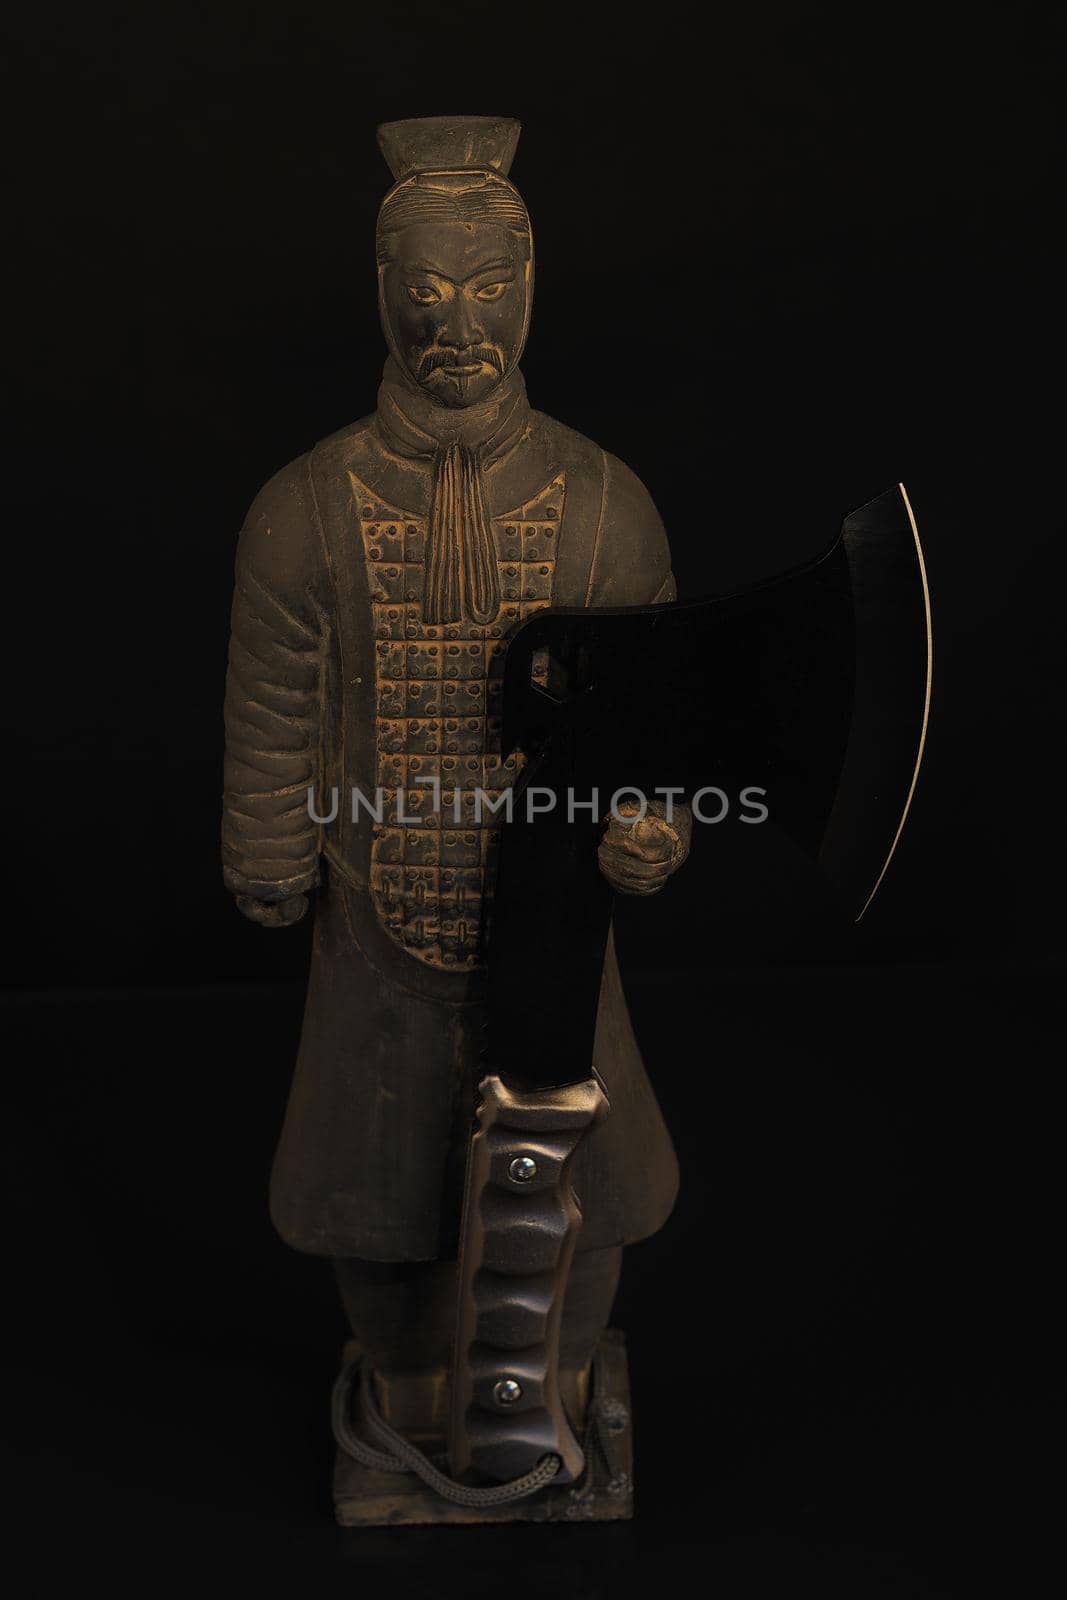 A Chinese soldier. A figurine or a statuette of a Chinese warrior with an axe. High quality photo